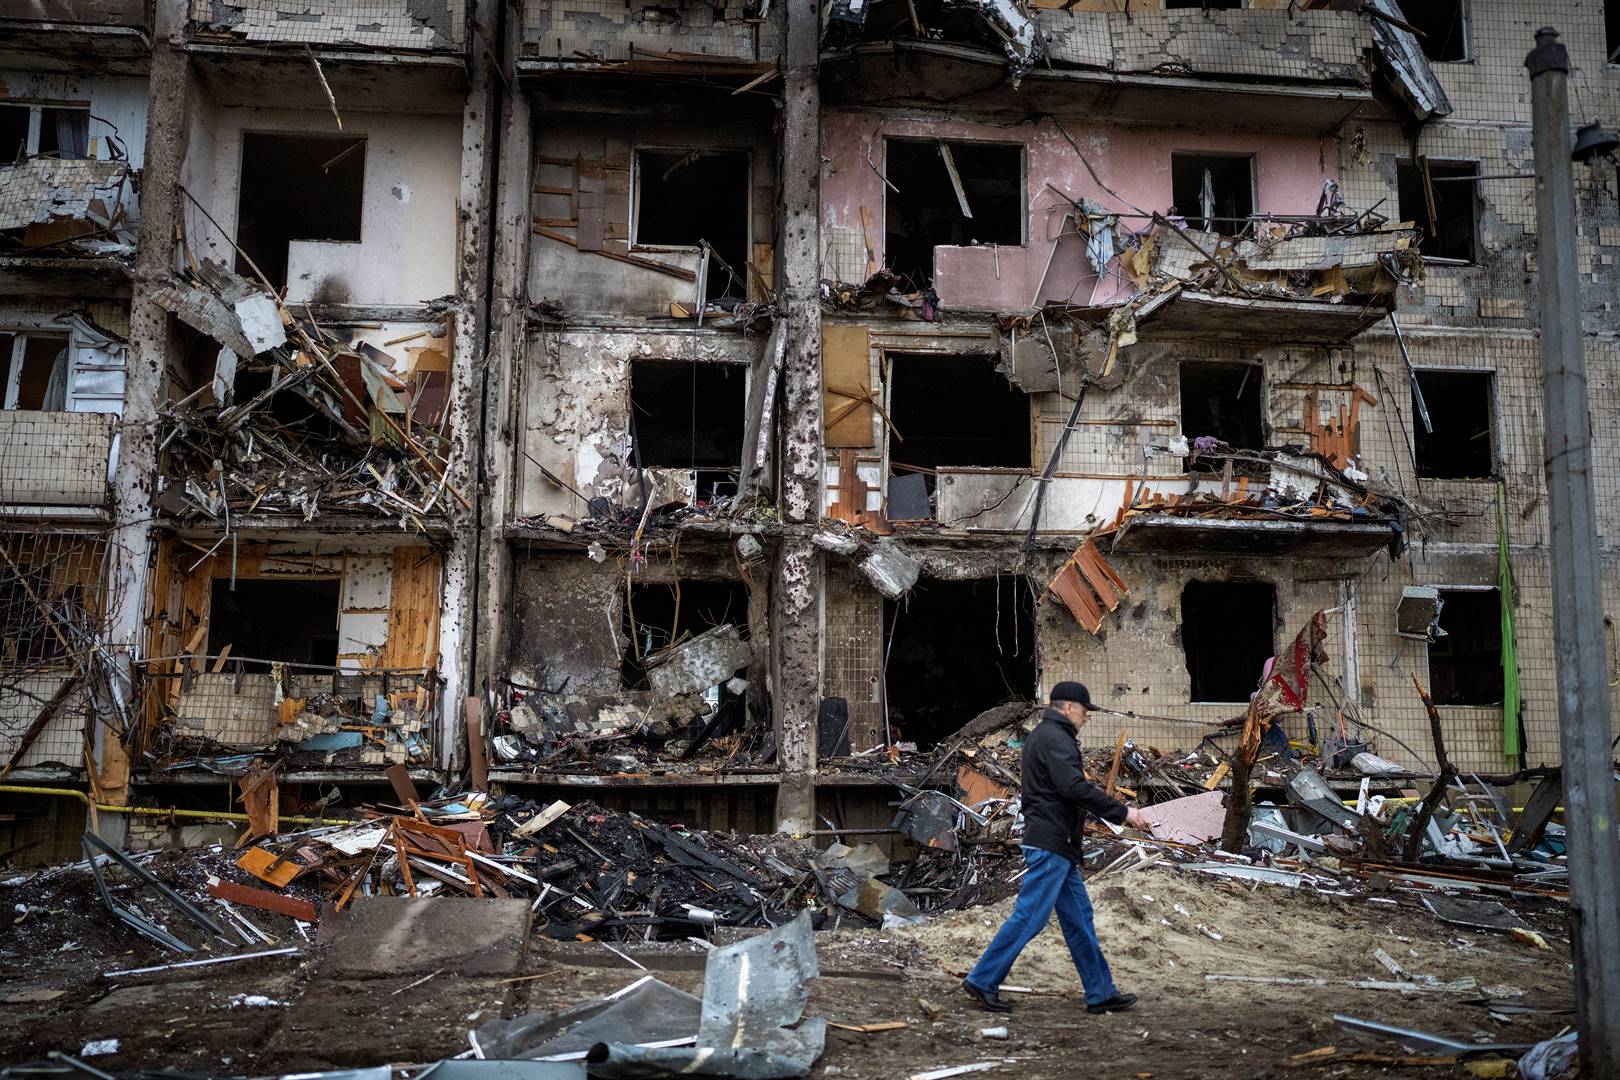 A man walks past a destroyed building following a rocket attack on the city of Kyiv, Ukraine, on Friday. Photo: Emilio Morenatti/AP